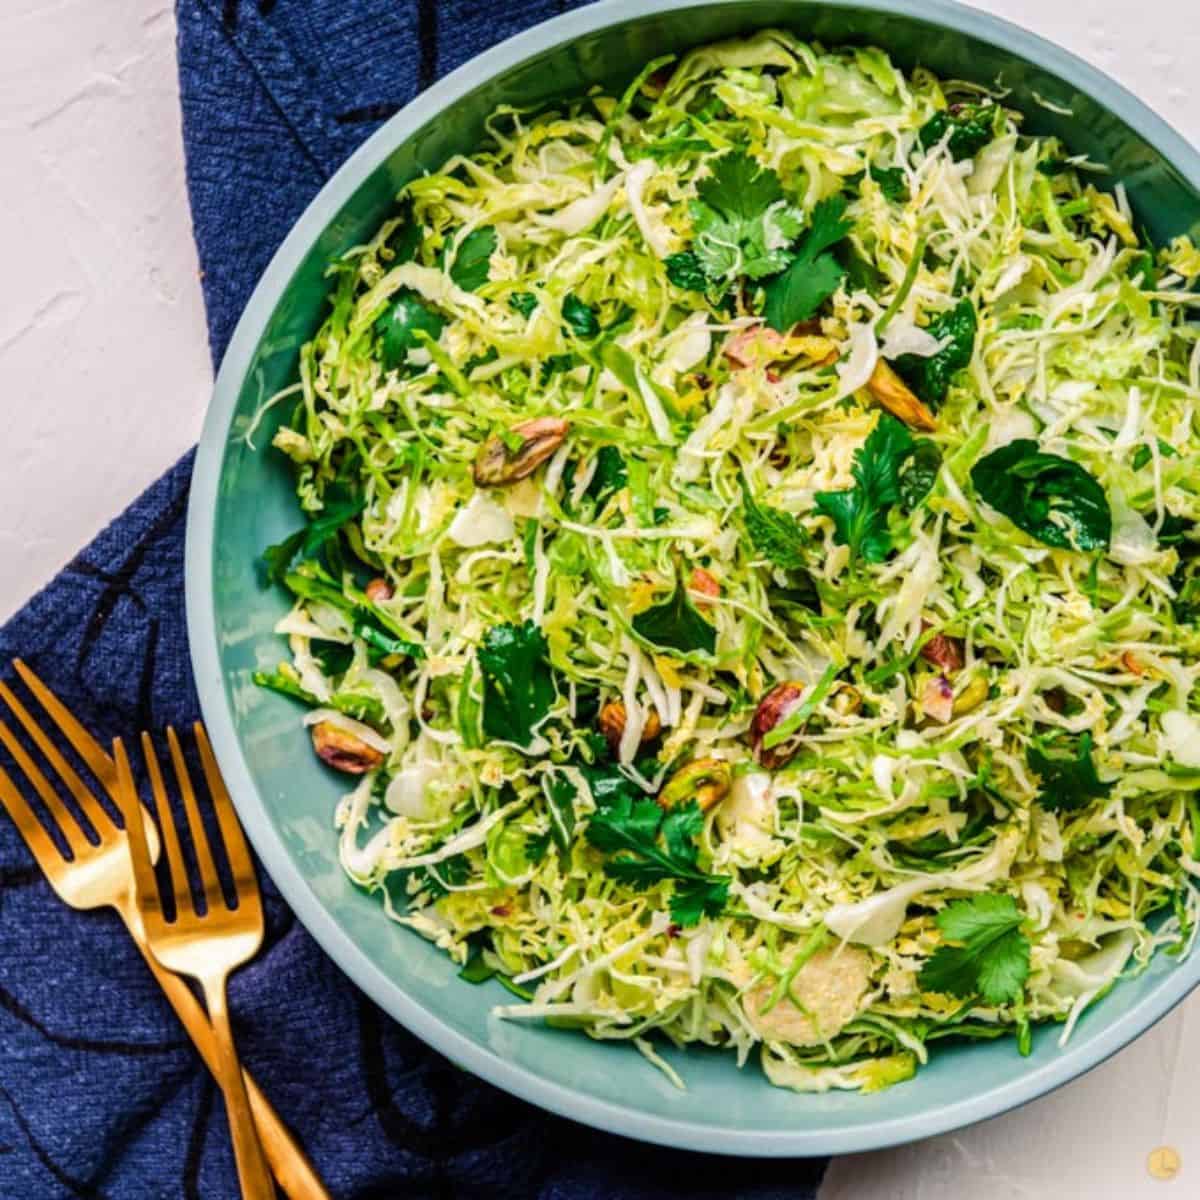 bowl of slaw made with brussels sprouts